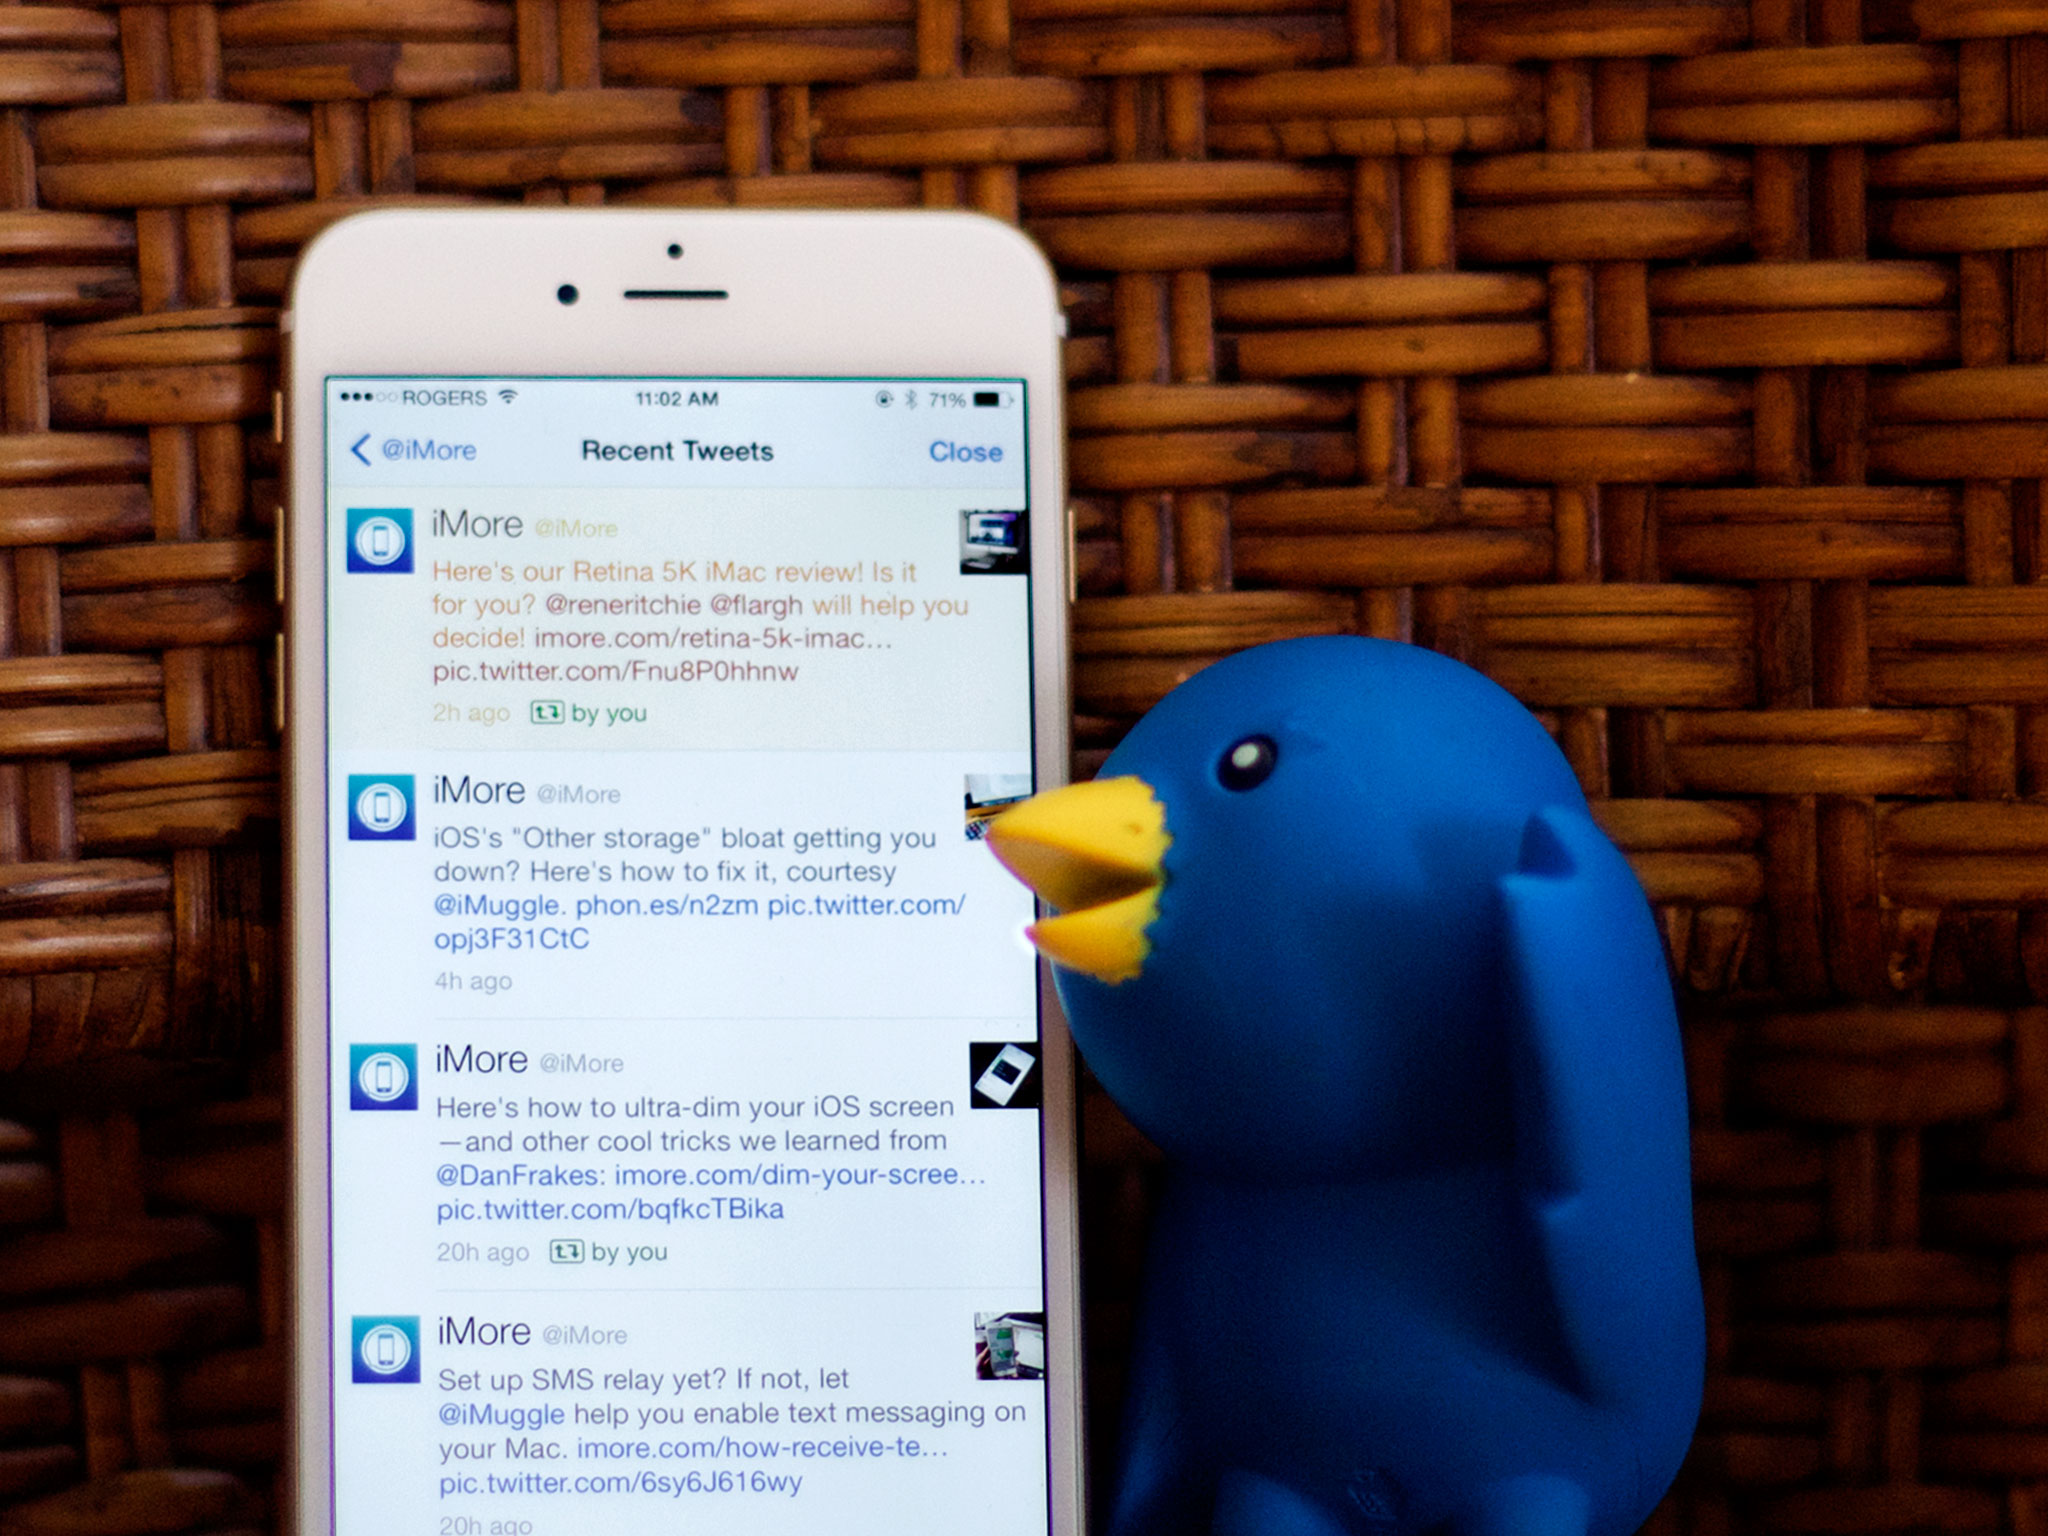 Deep, deep dive into Twitter apps for iPhone and iPad